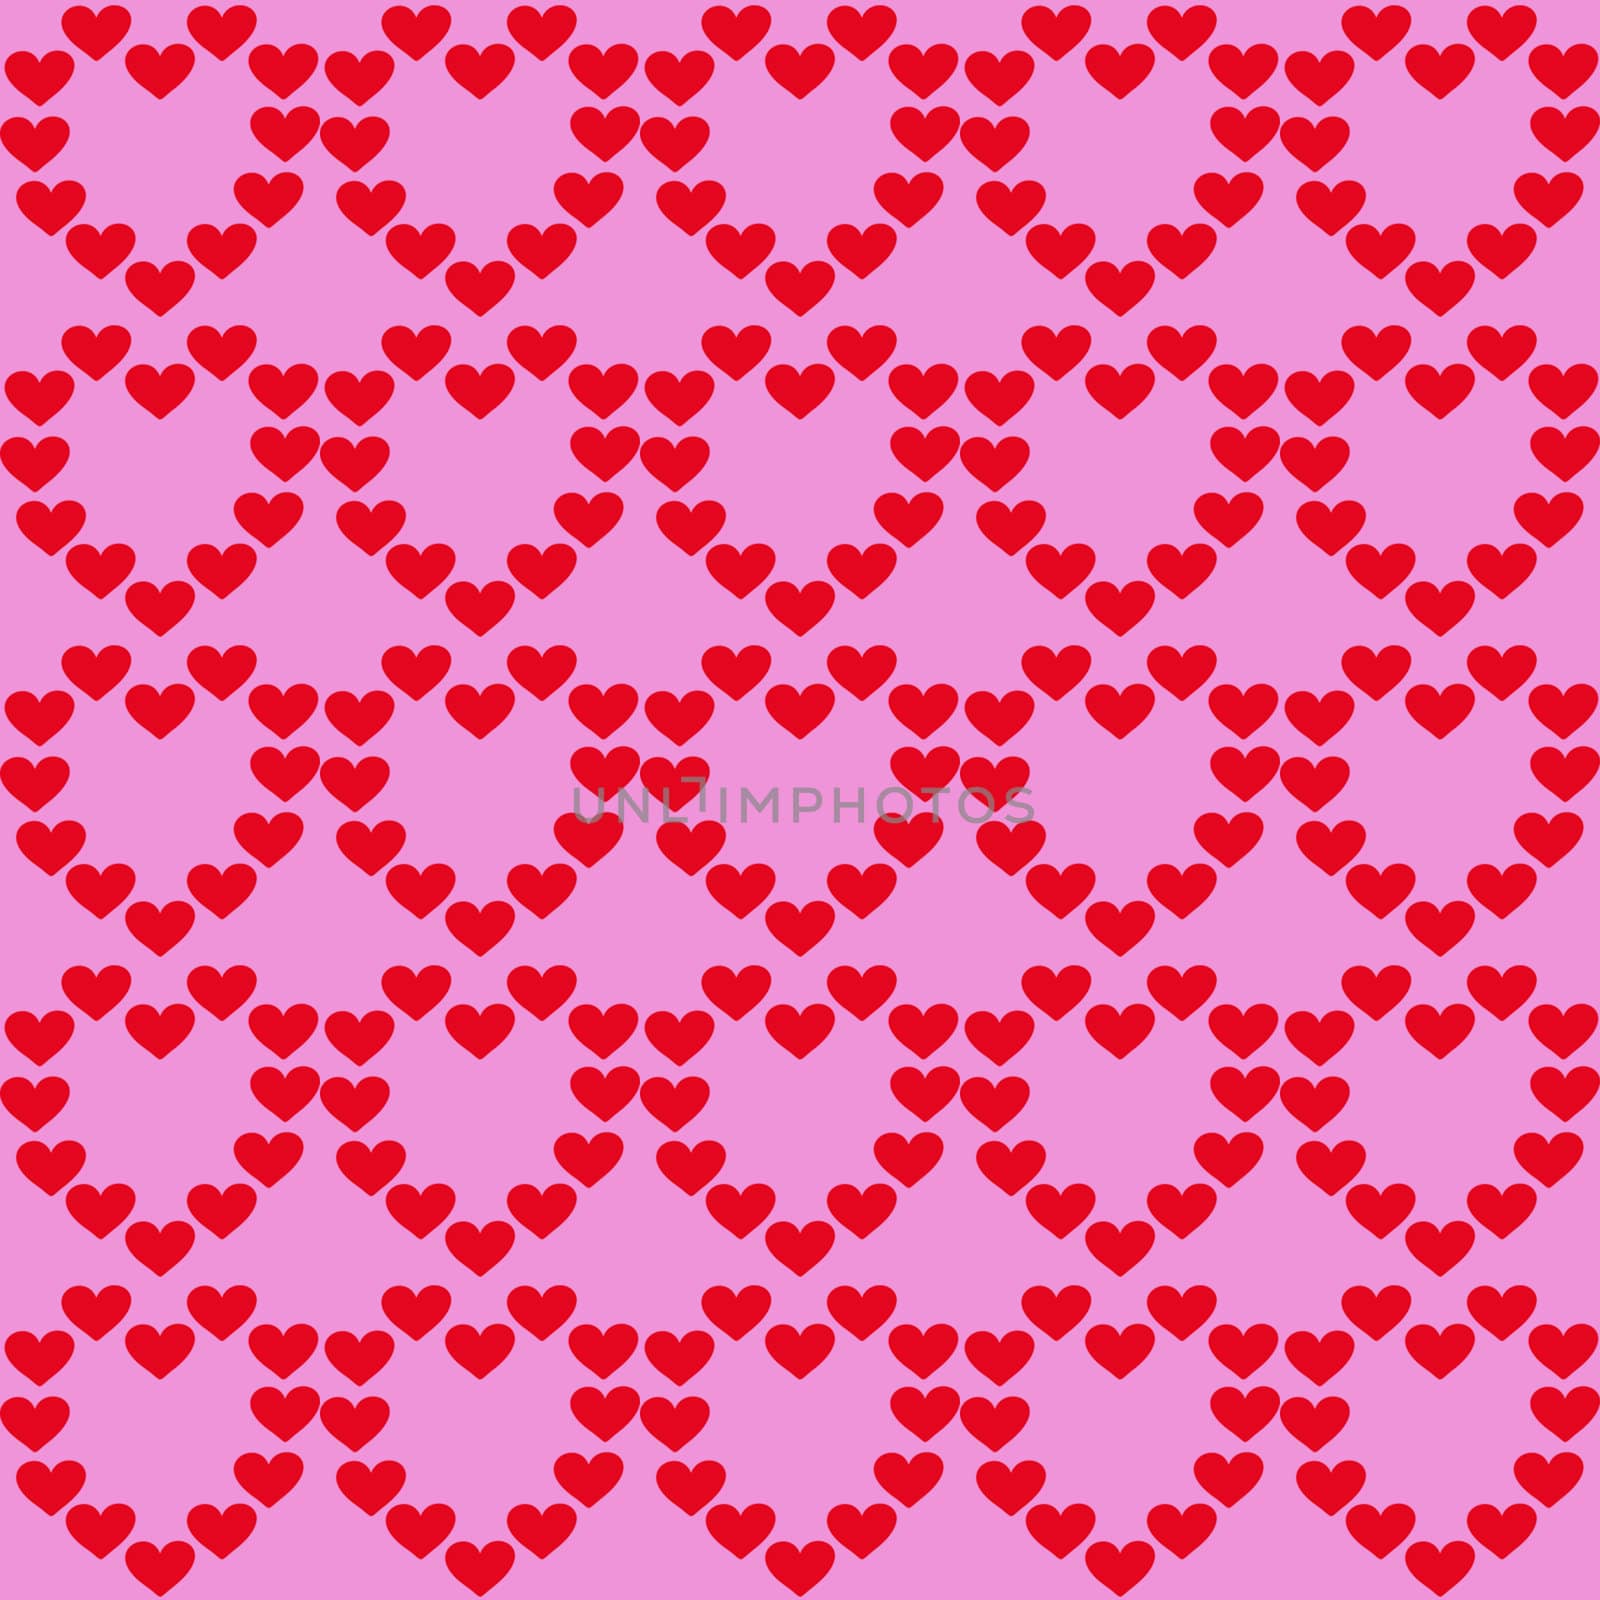 Background from hearts. Red hearts on a pink background.